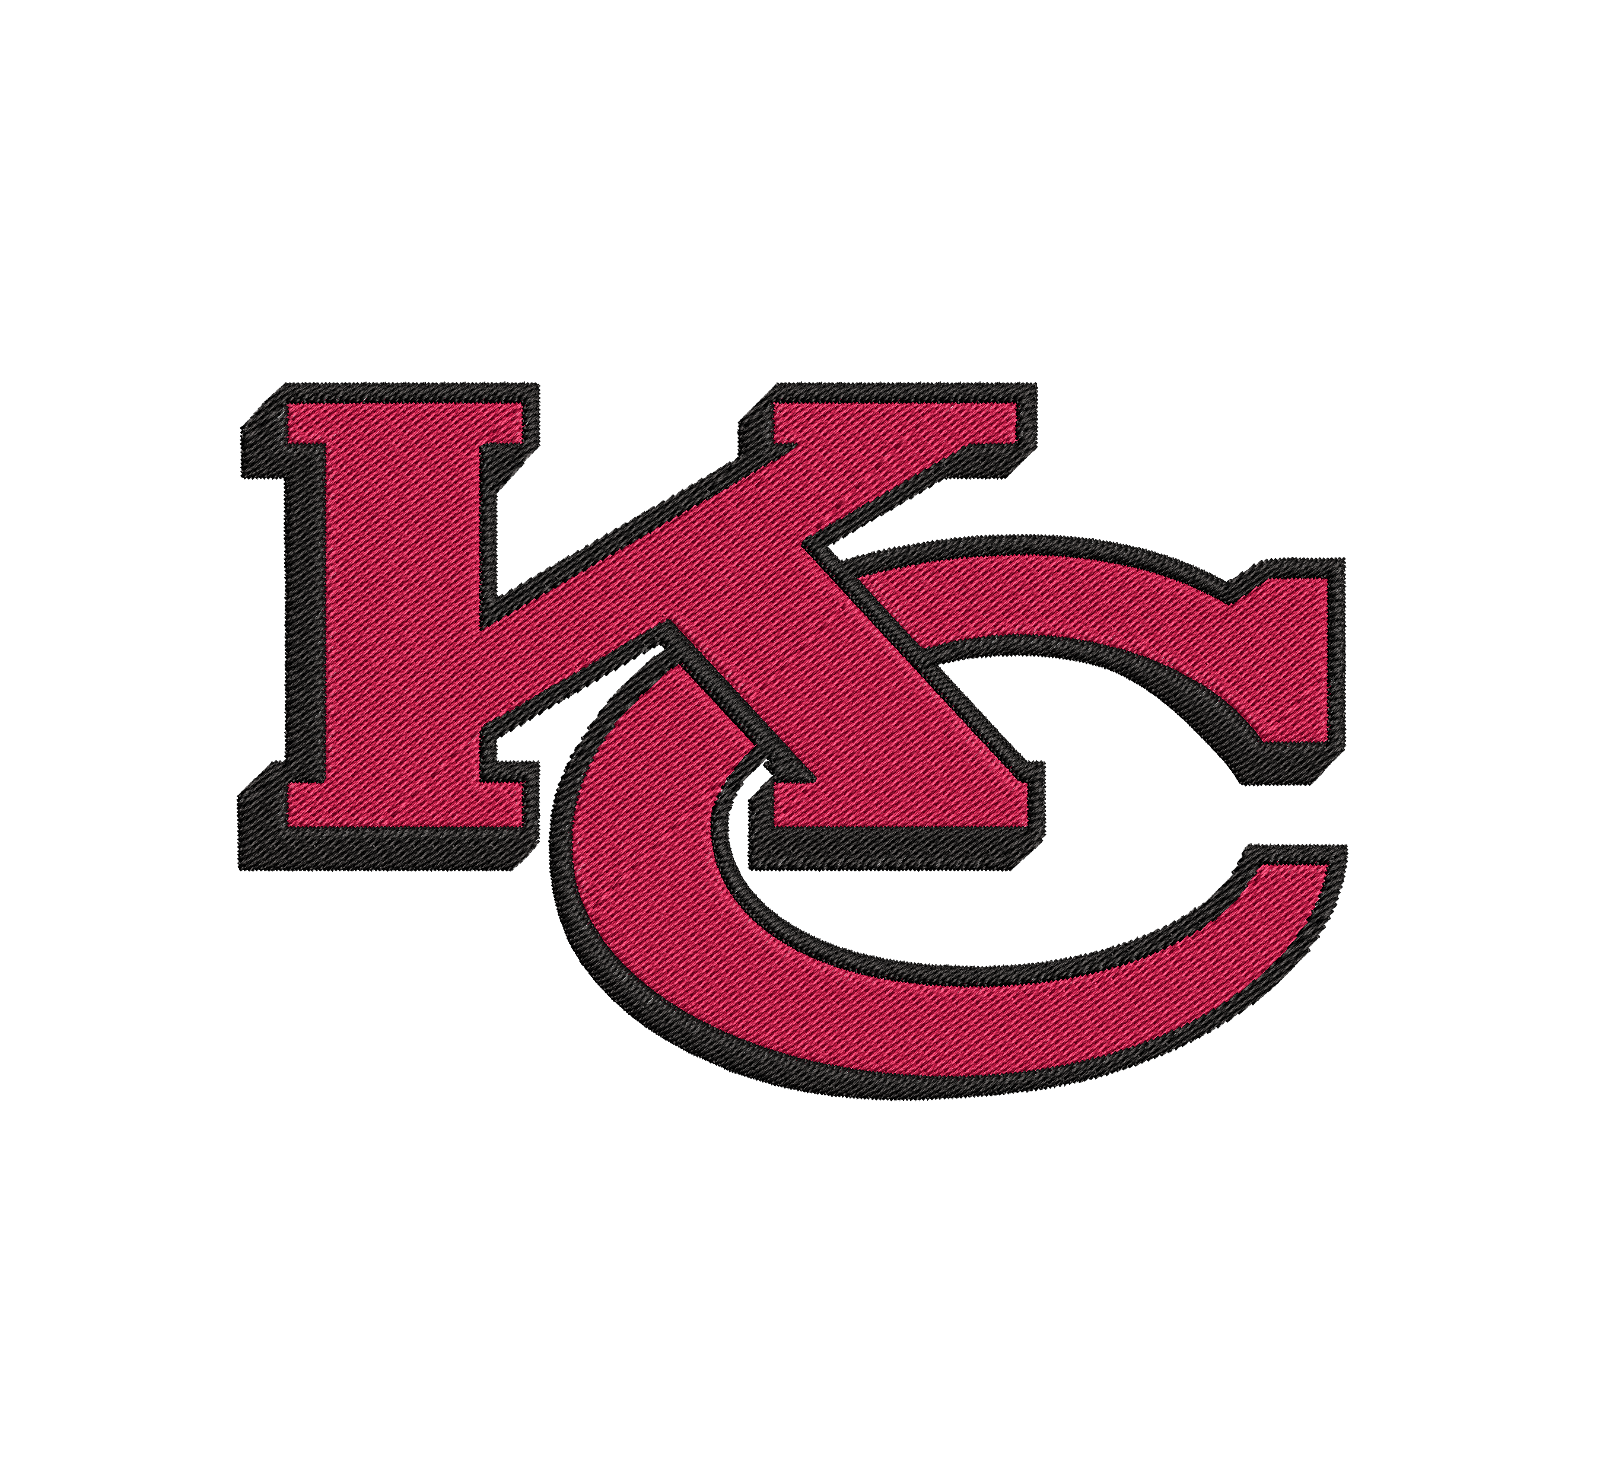 Kansas City Chiefs 4 : Embroidery Design - FineryEmbroidery